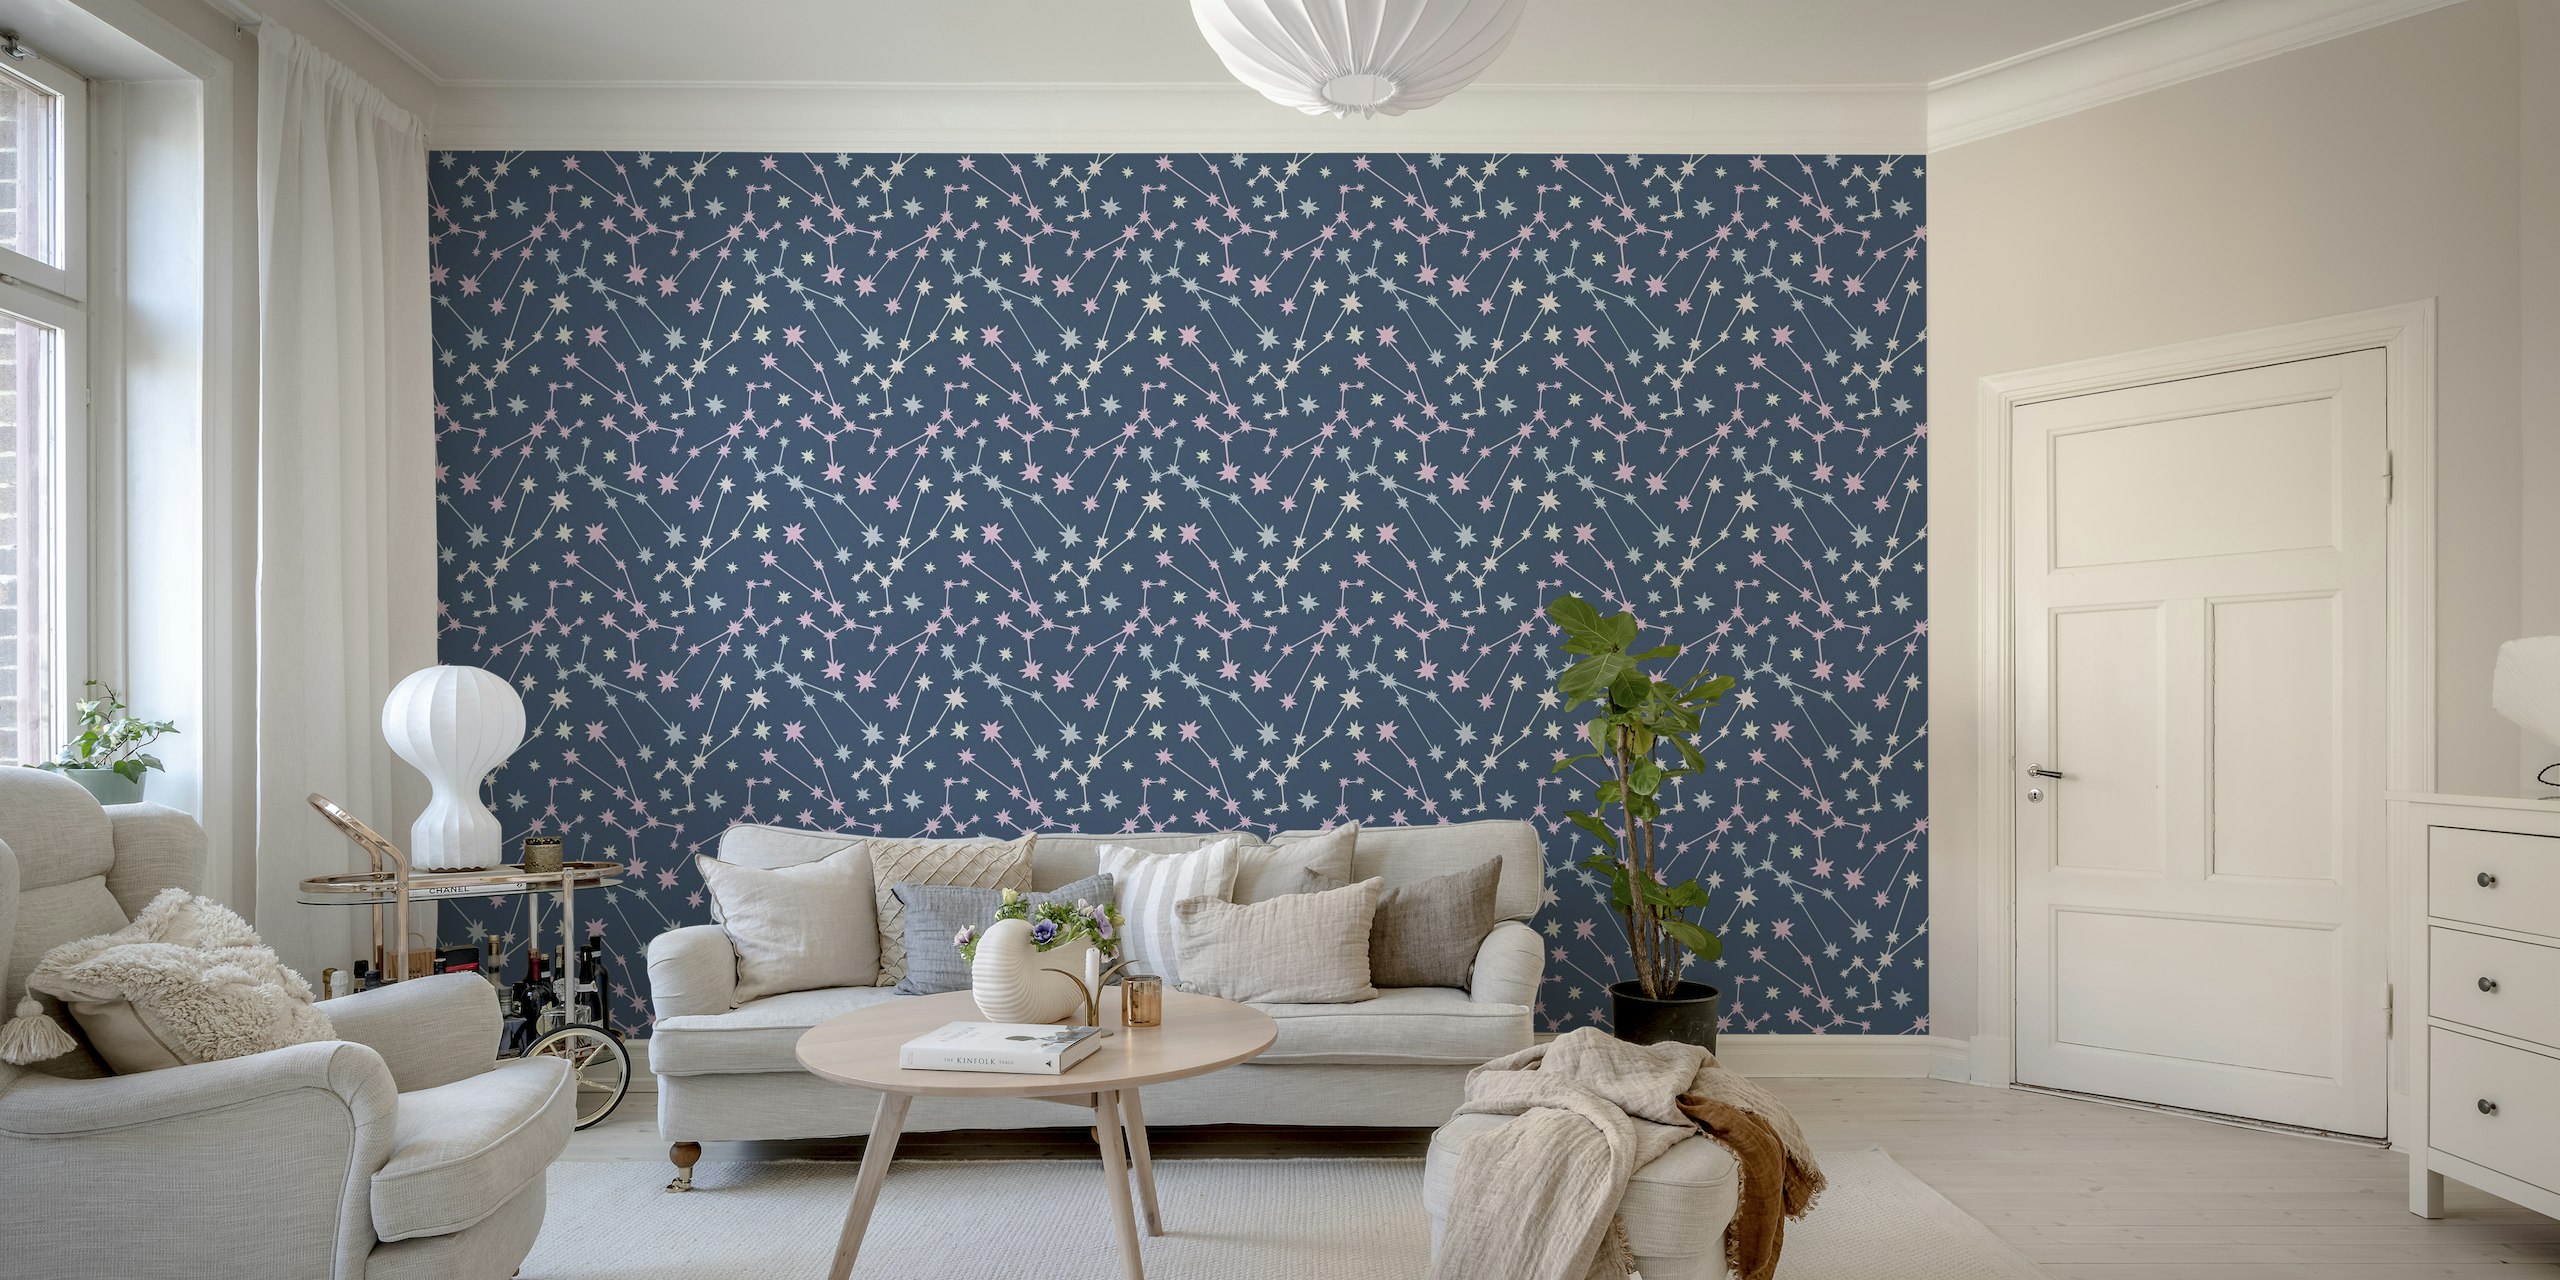 STARRY NIGHT Constellations mural featuring pink and white stars on a blue background reminiscent of the night sky